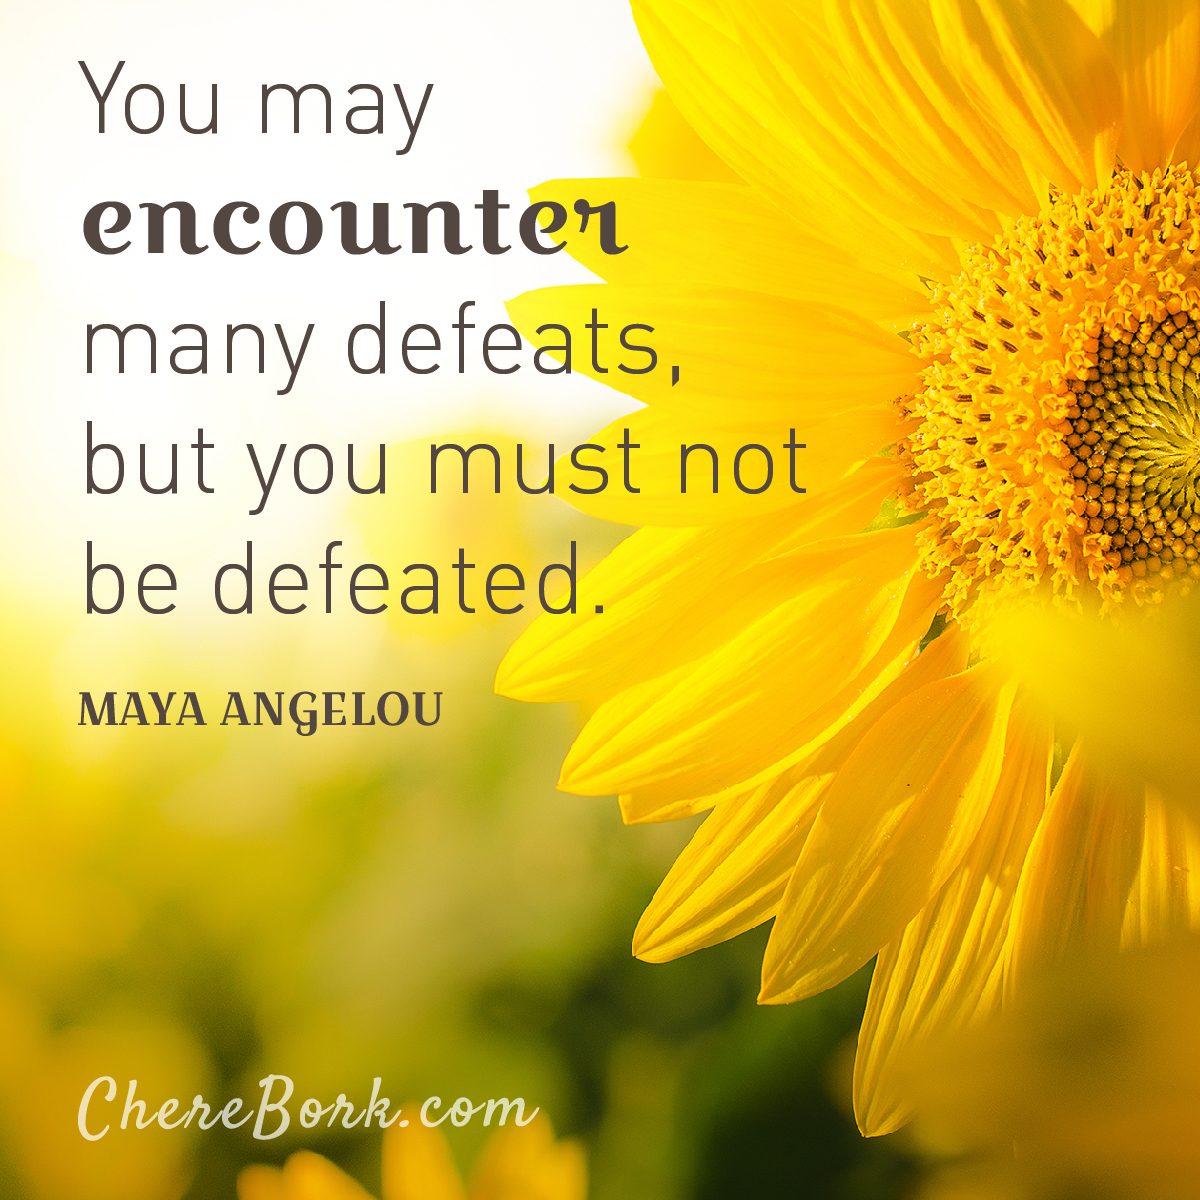 You may encounter many defeats, but you must not be defeated. -Maya Angelou